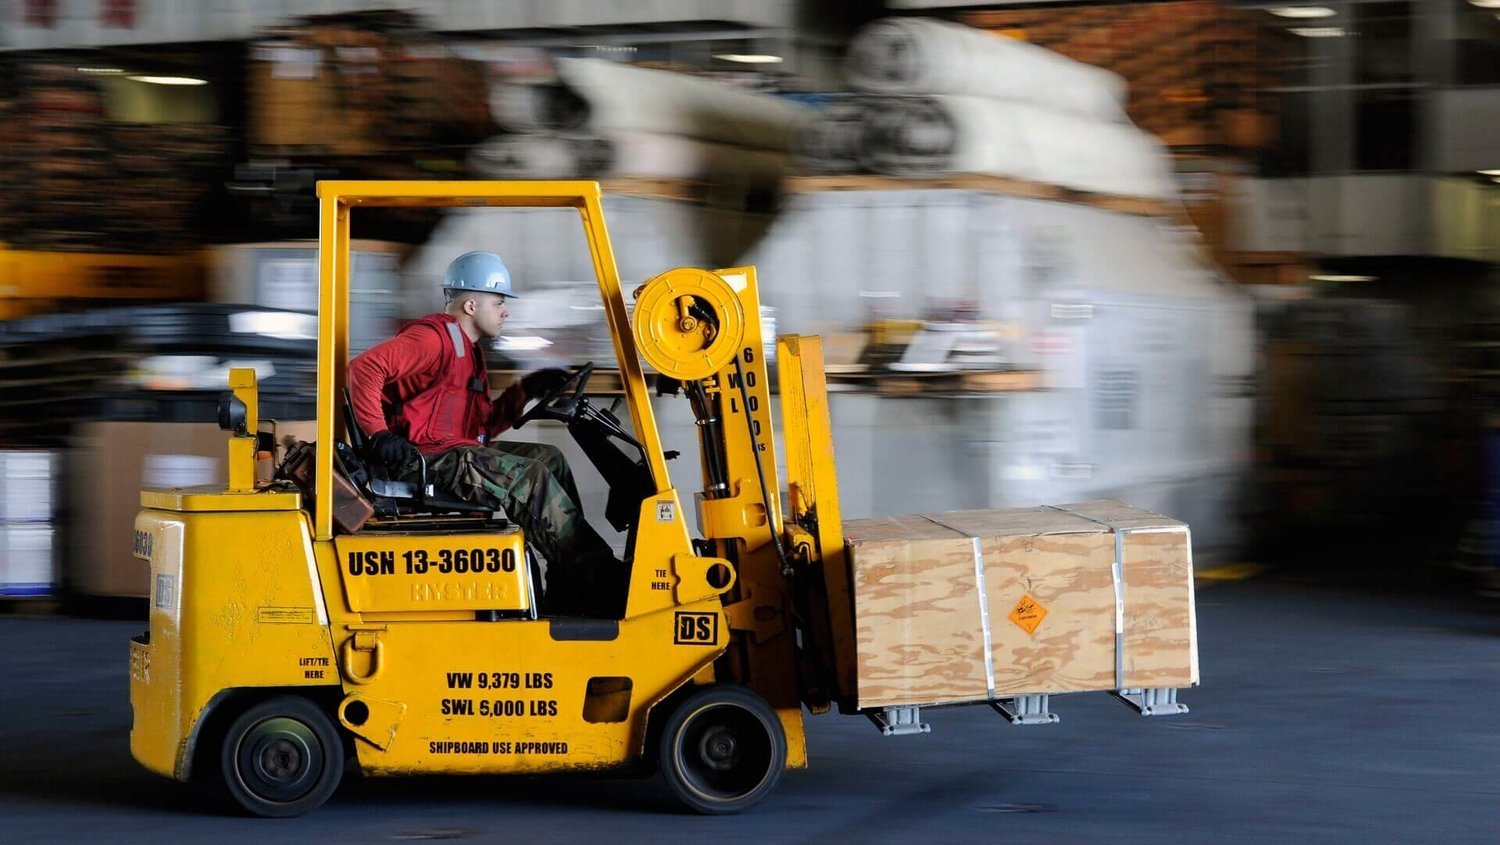 Tips for operating a forklift safely